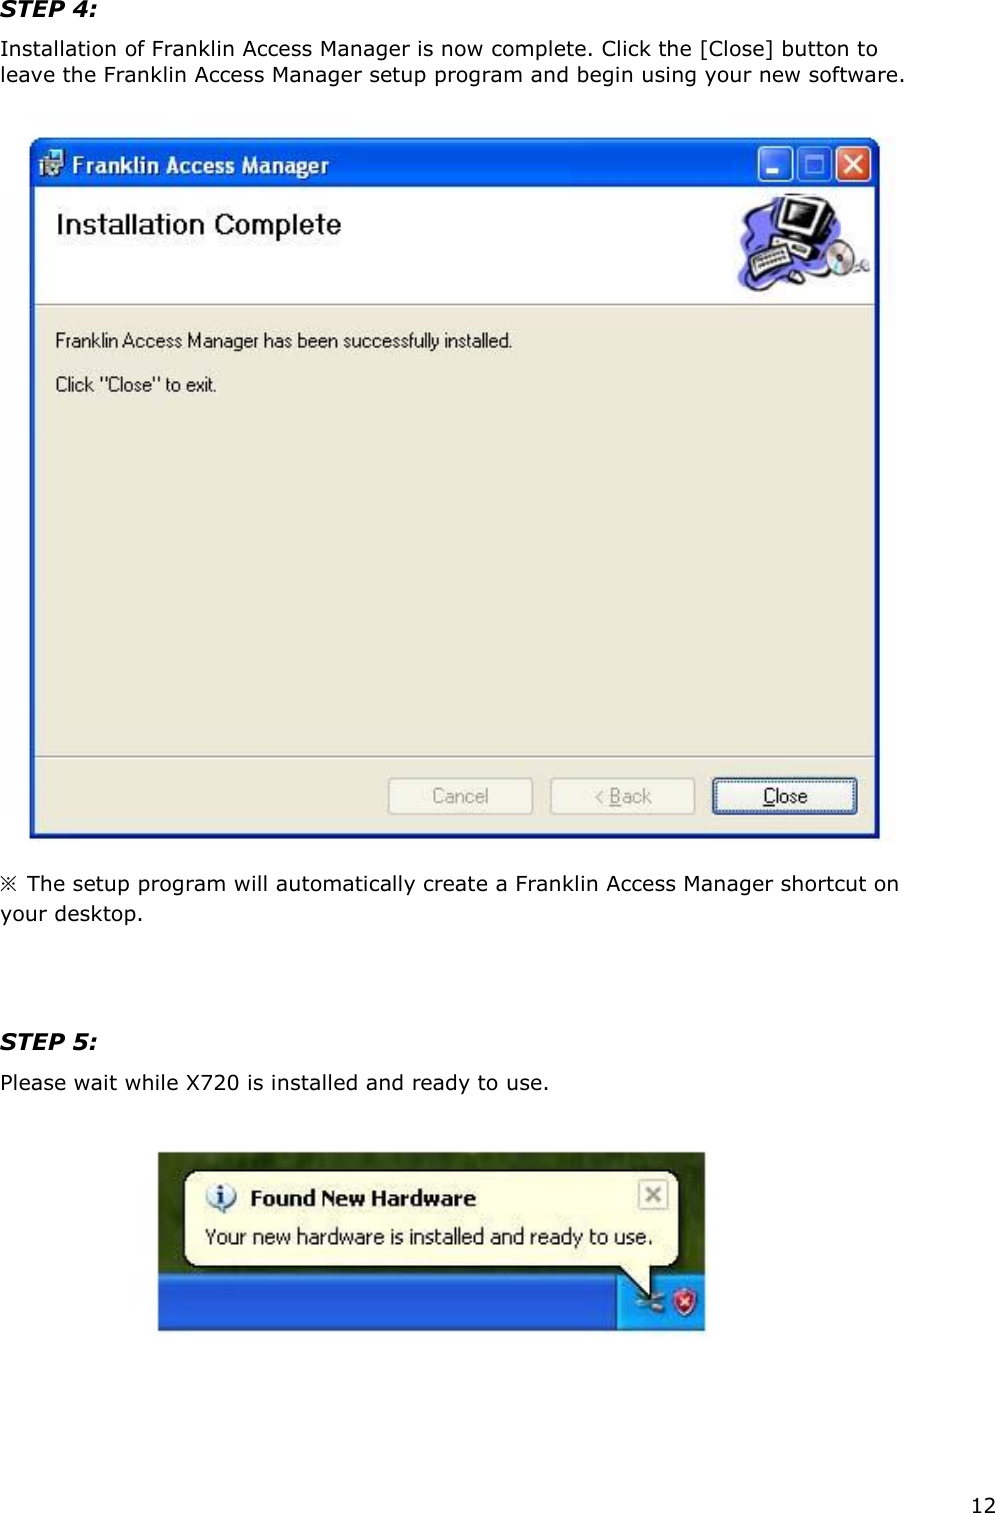 12  STEP 4:   Installation of Franklin Access Manager is now complete. Click the [Close] button to leave the Franklin Access Manager setup program and begin using your new software.       ※  The setup program will automatically create a Franklin Access Manager shortcut on your desktop.        STEP 5:  Please wait while X720 is installed and ready to use.                             